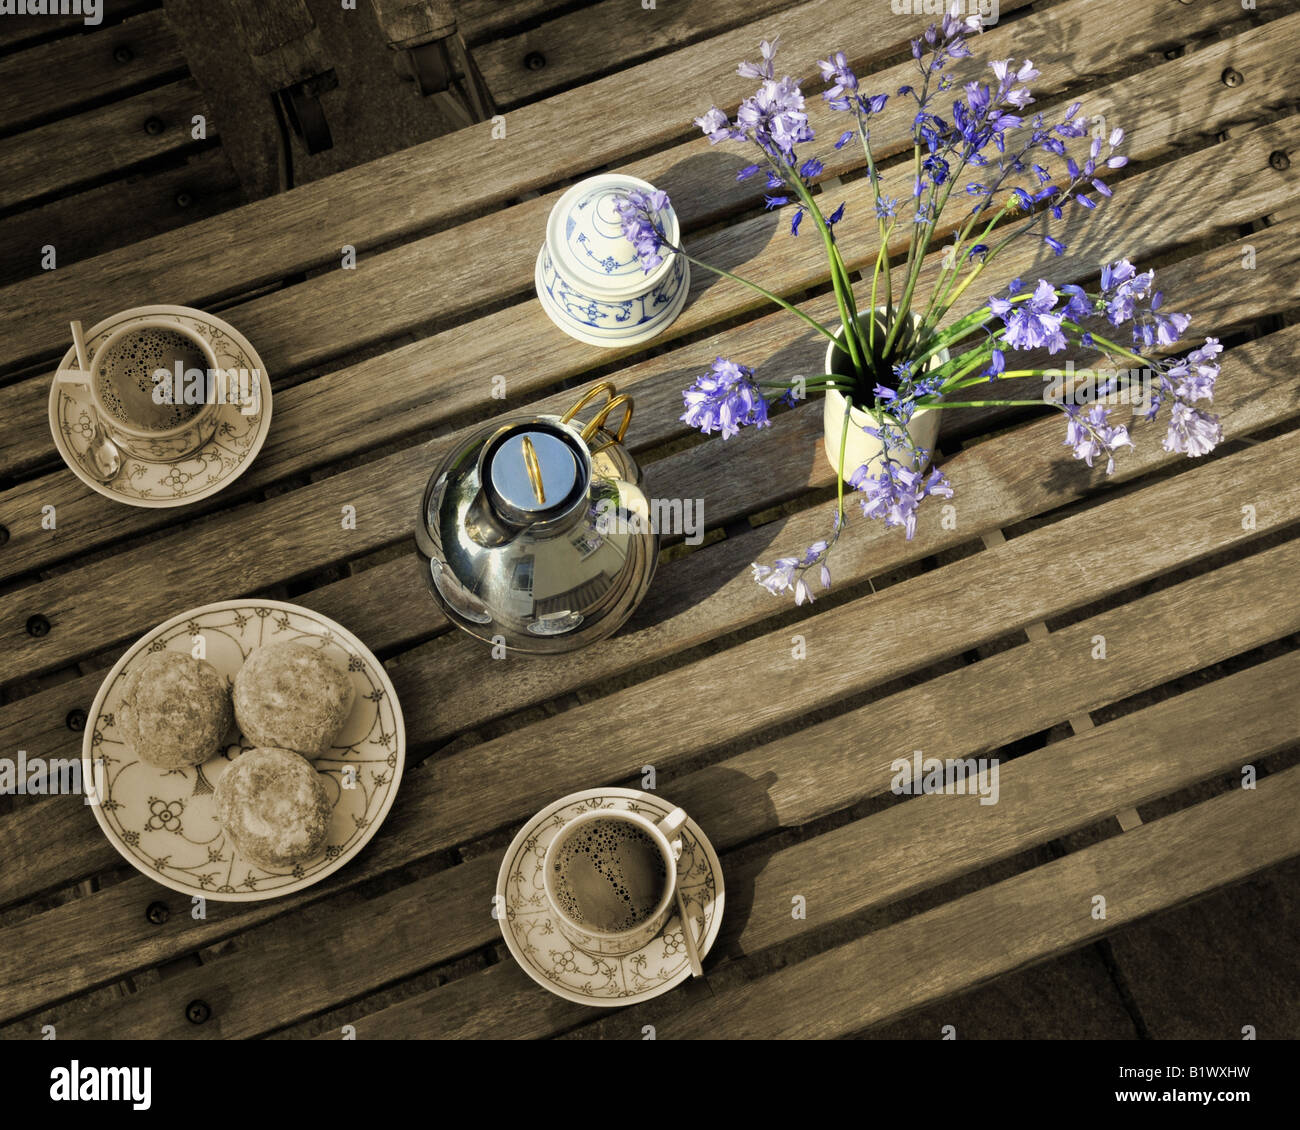 LIFESTYLE: Coffe Table with flowers Stock Photo